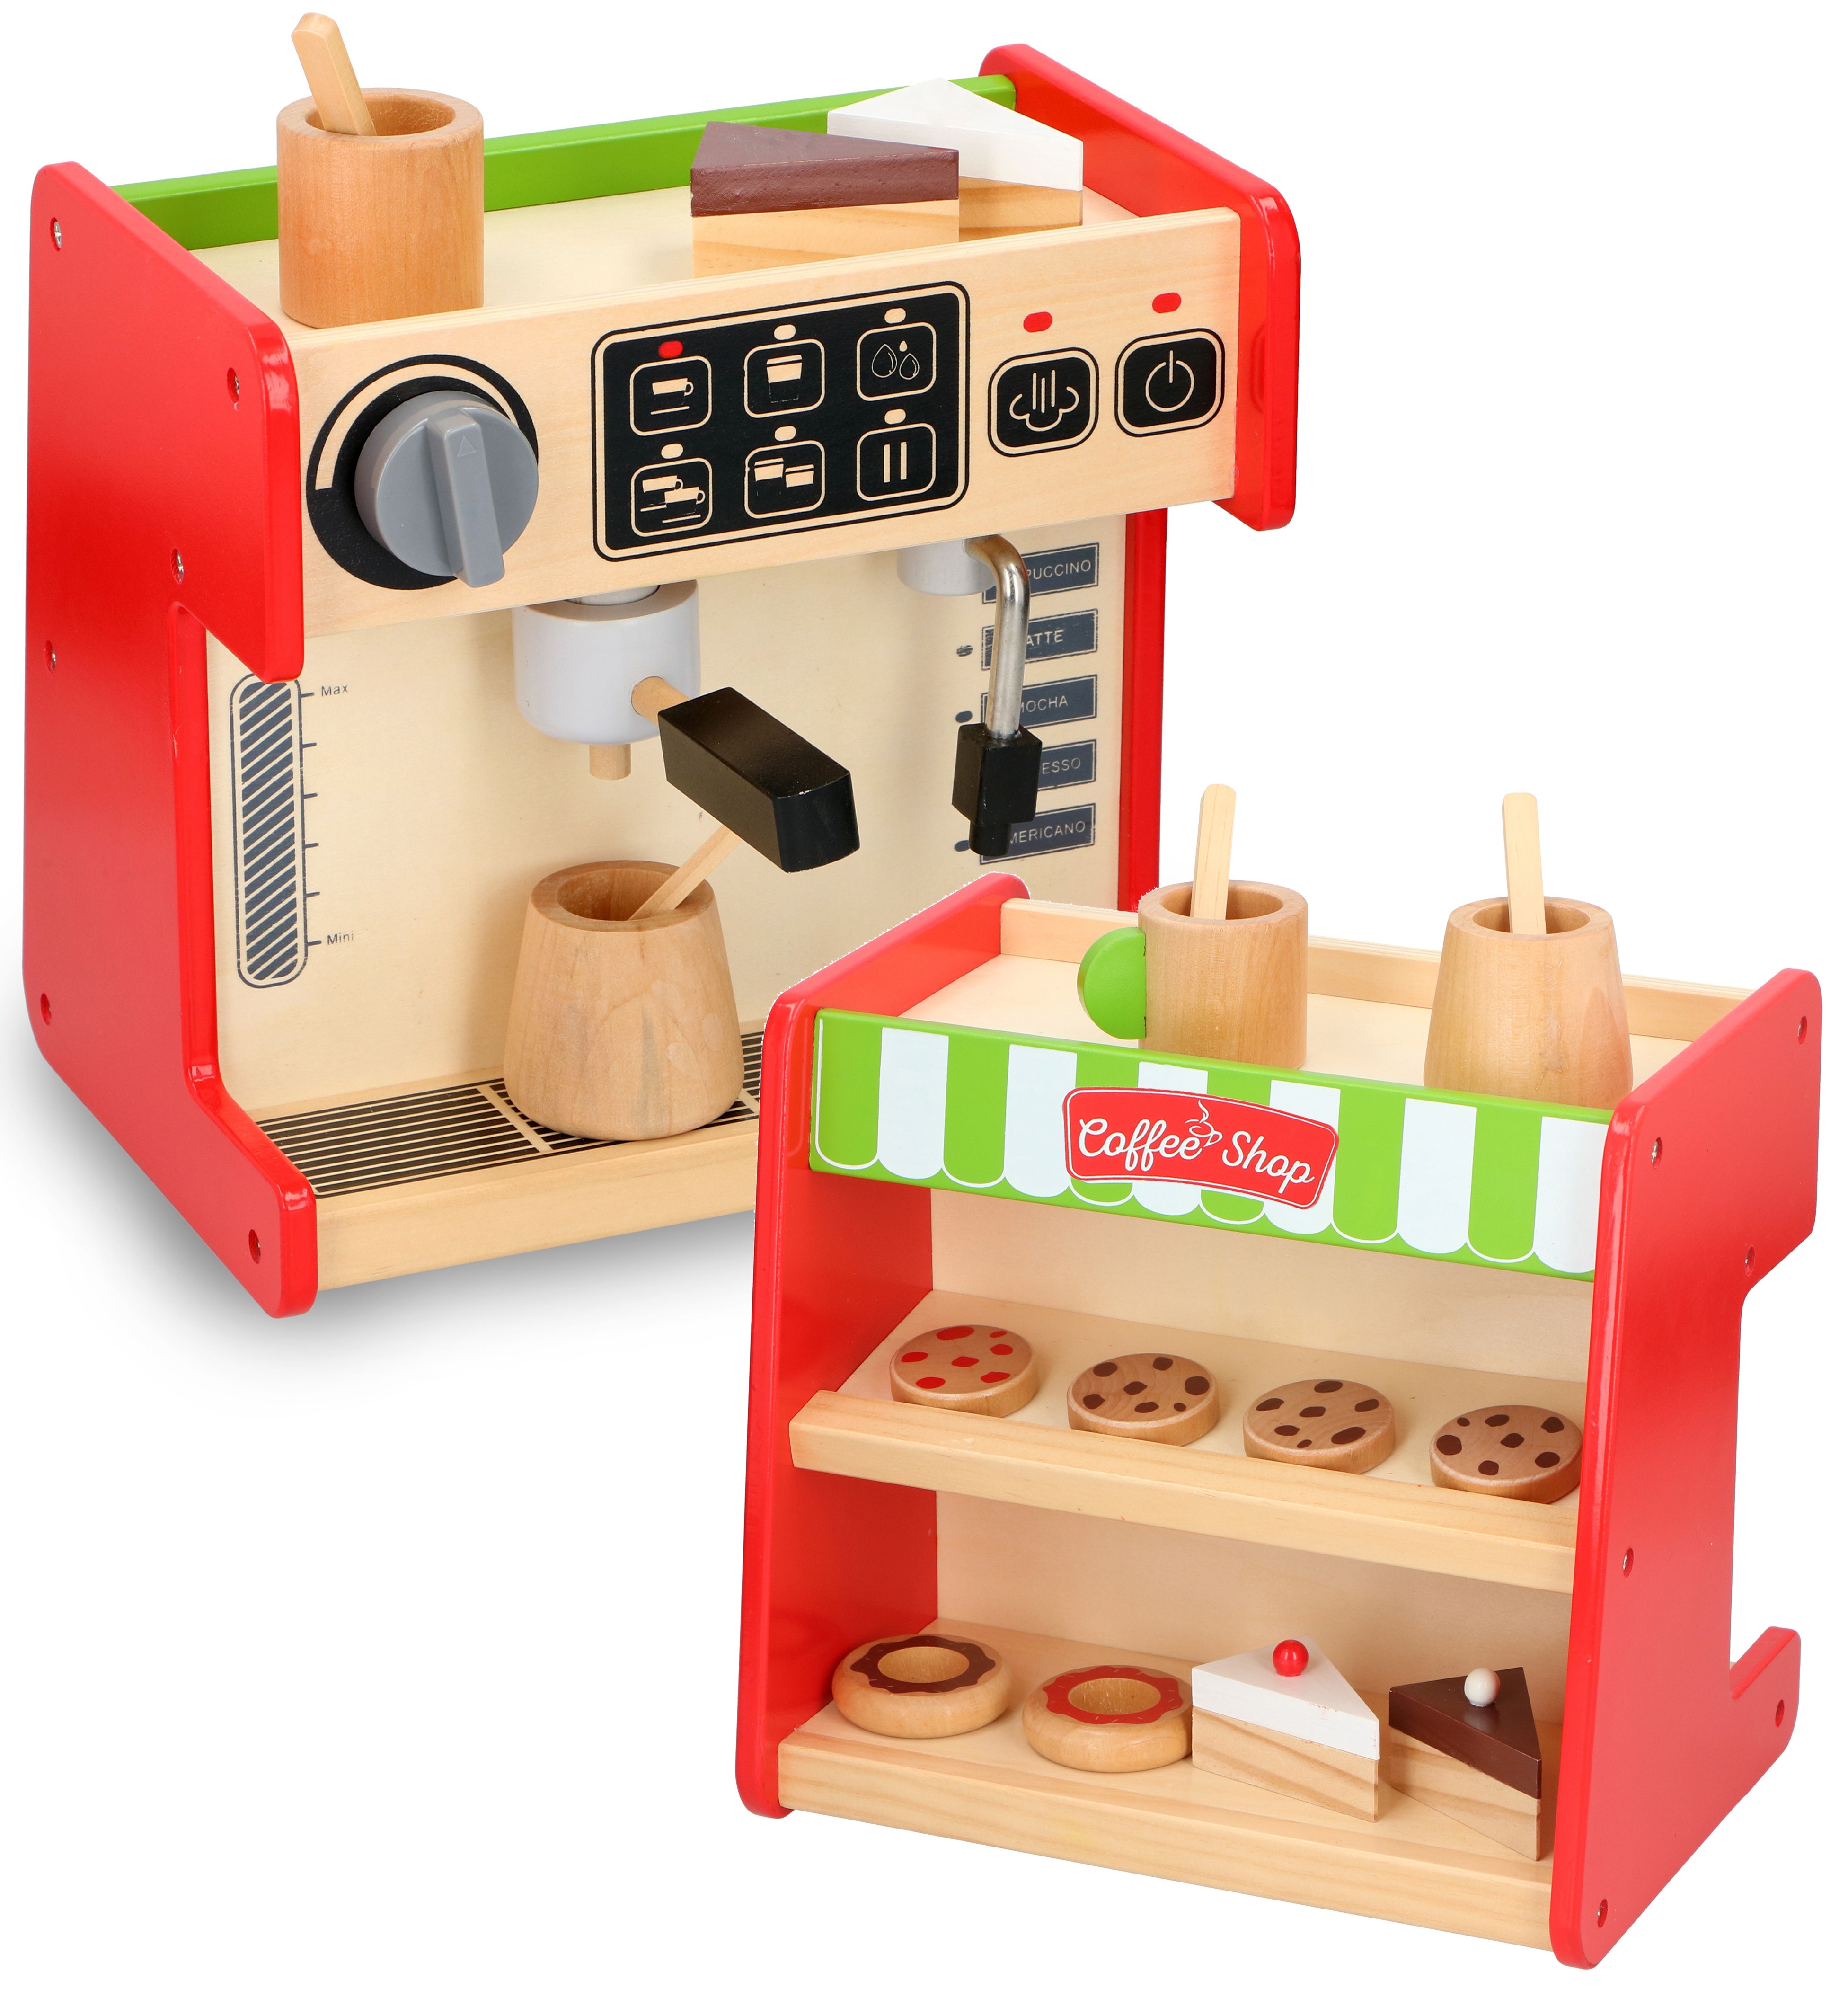 1set Pretend Play, Creative Coffee Machine & Cup Design Toy For Kids